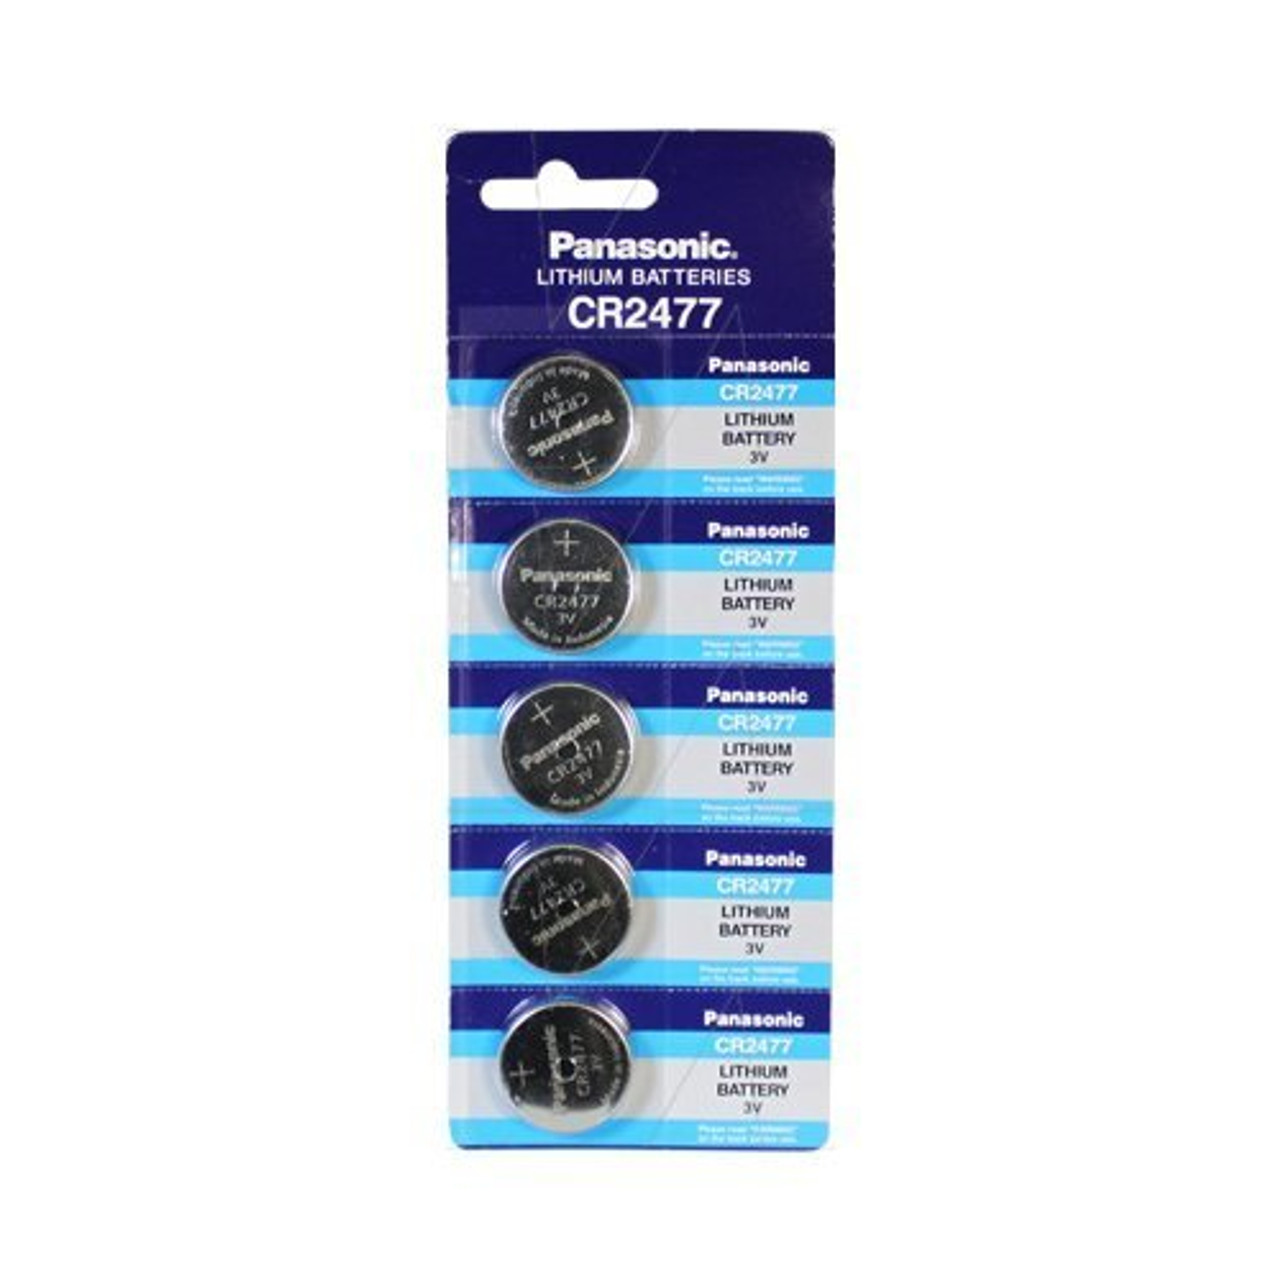 PANASONIC BATTERIES CR2477 BATTERY, LITHIUM, 3V, COIN CELL (5 pieces) 